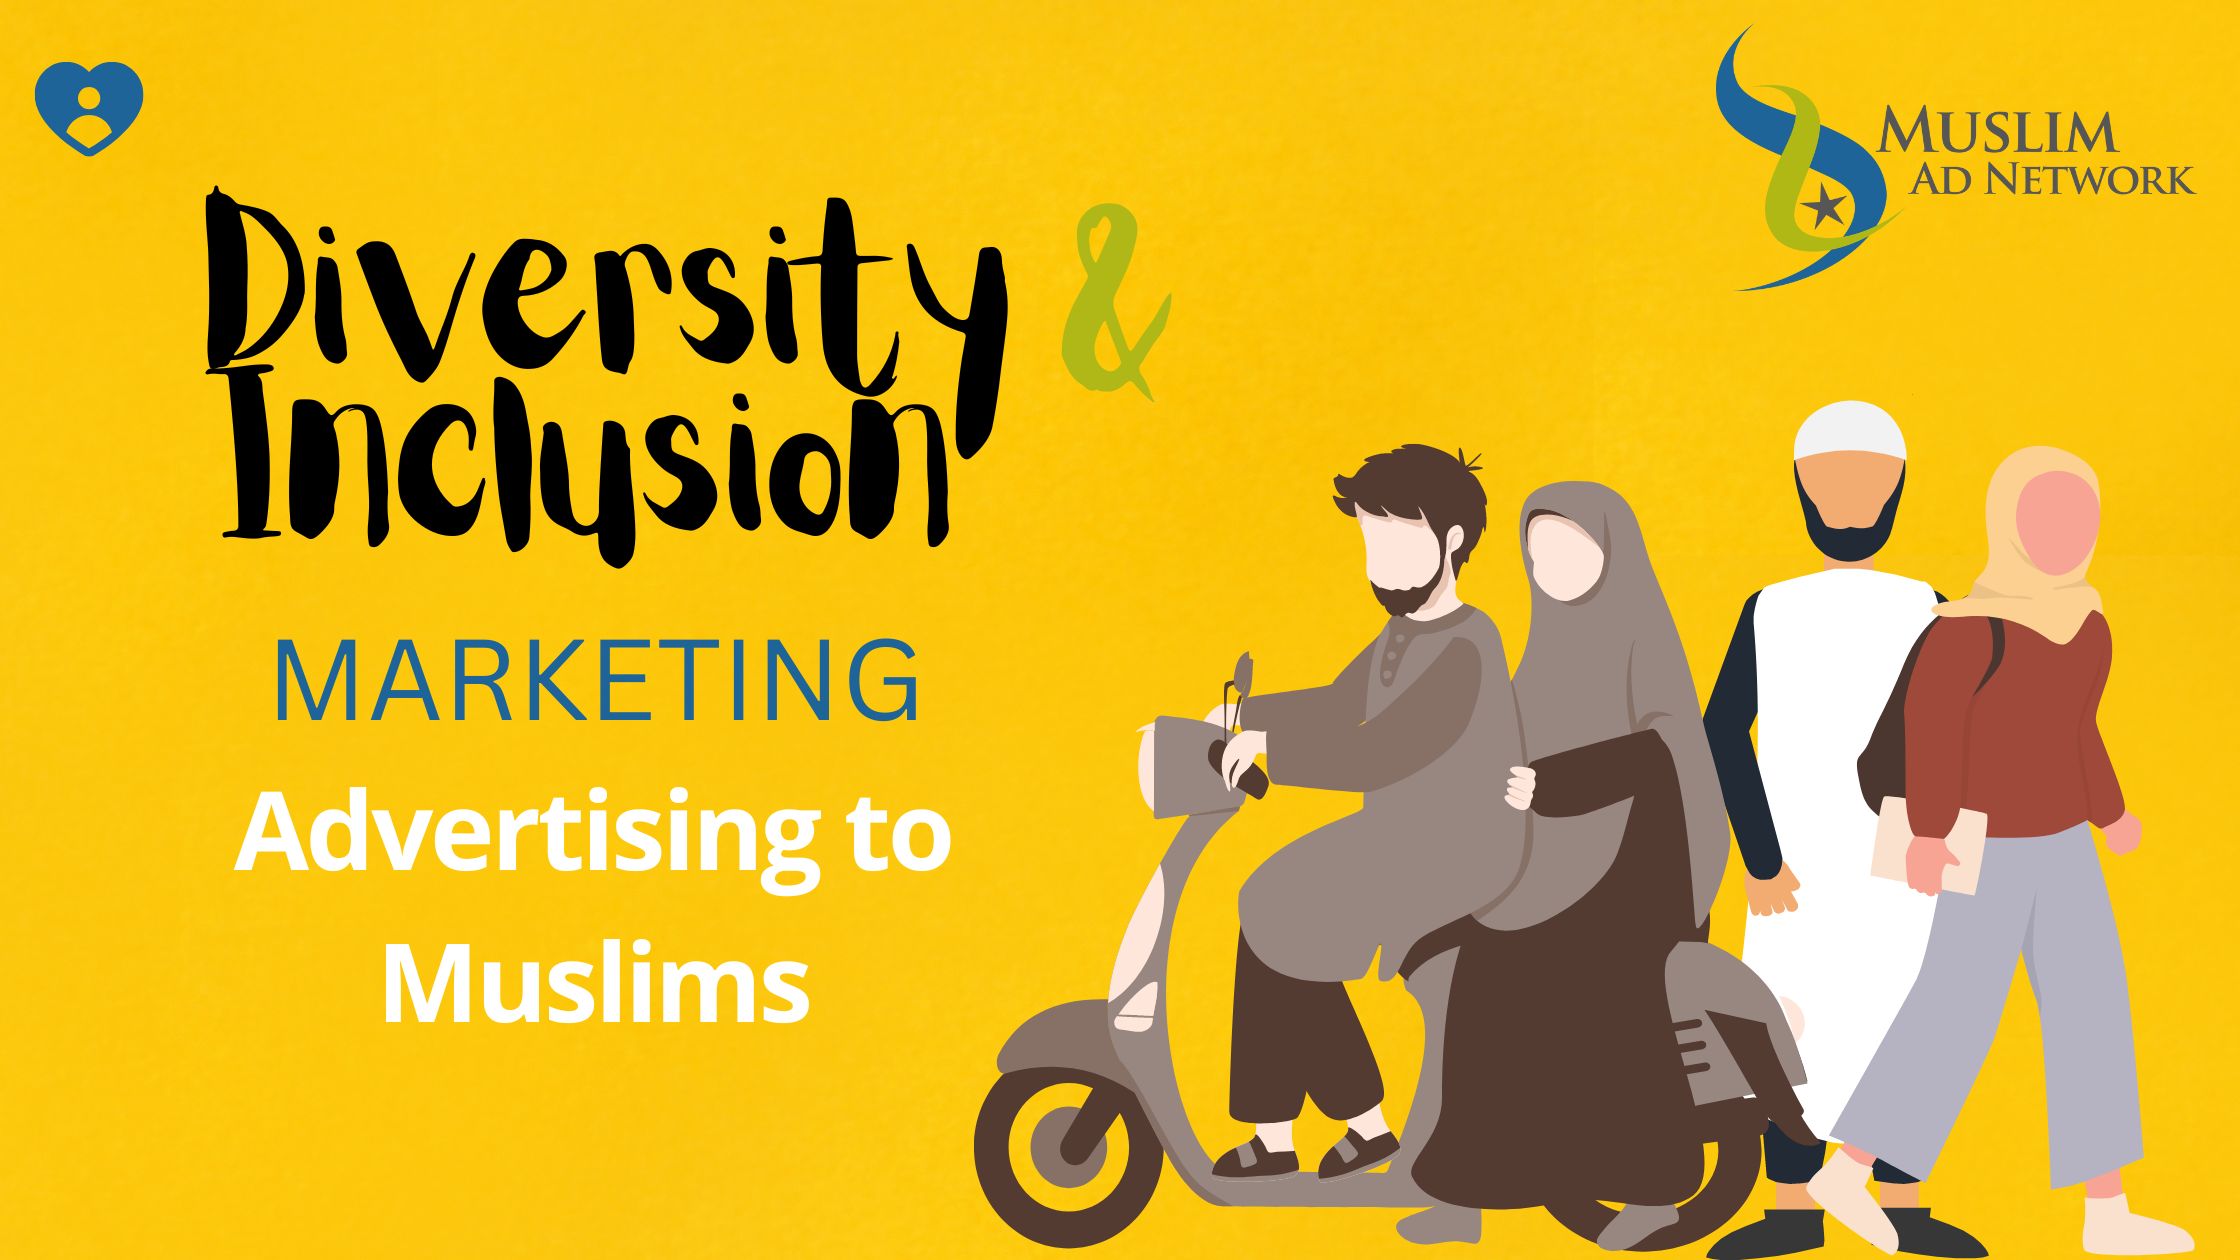 How to Target Advertisements to Muslims with Impactful Diversity and Inclusion Marketing